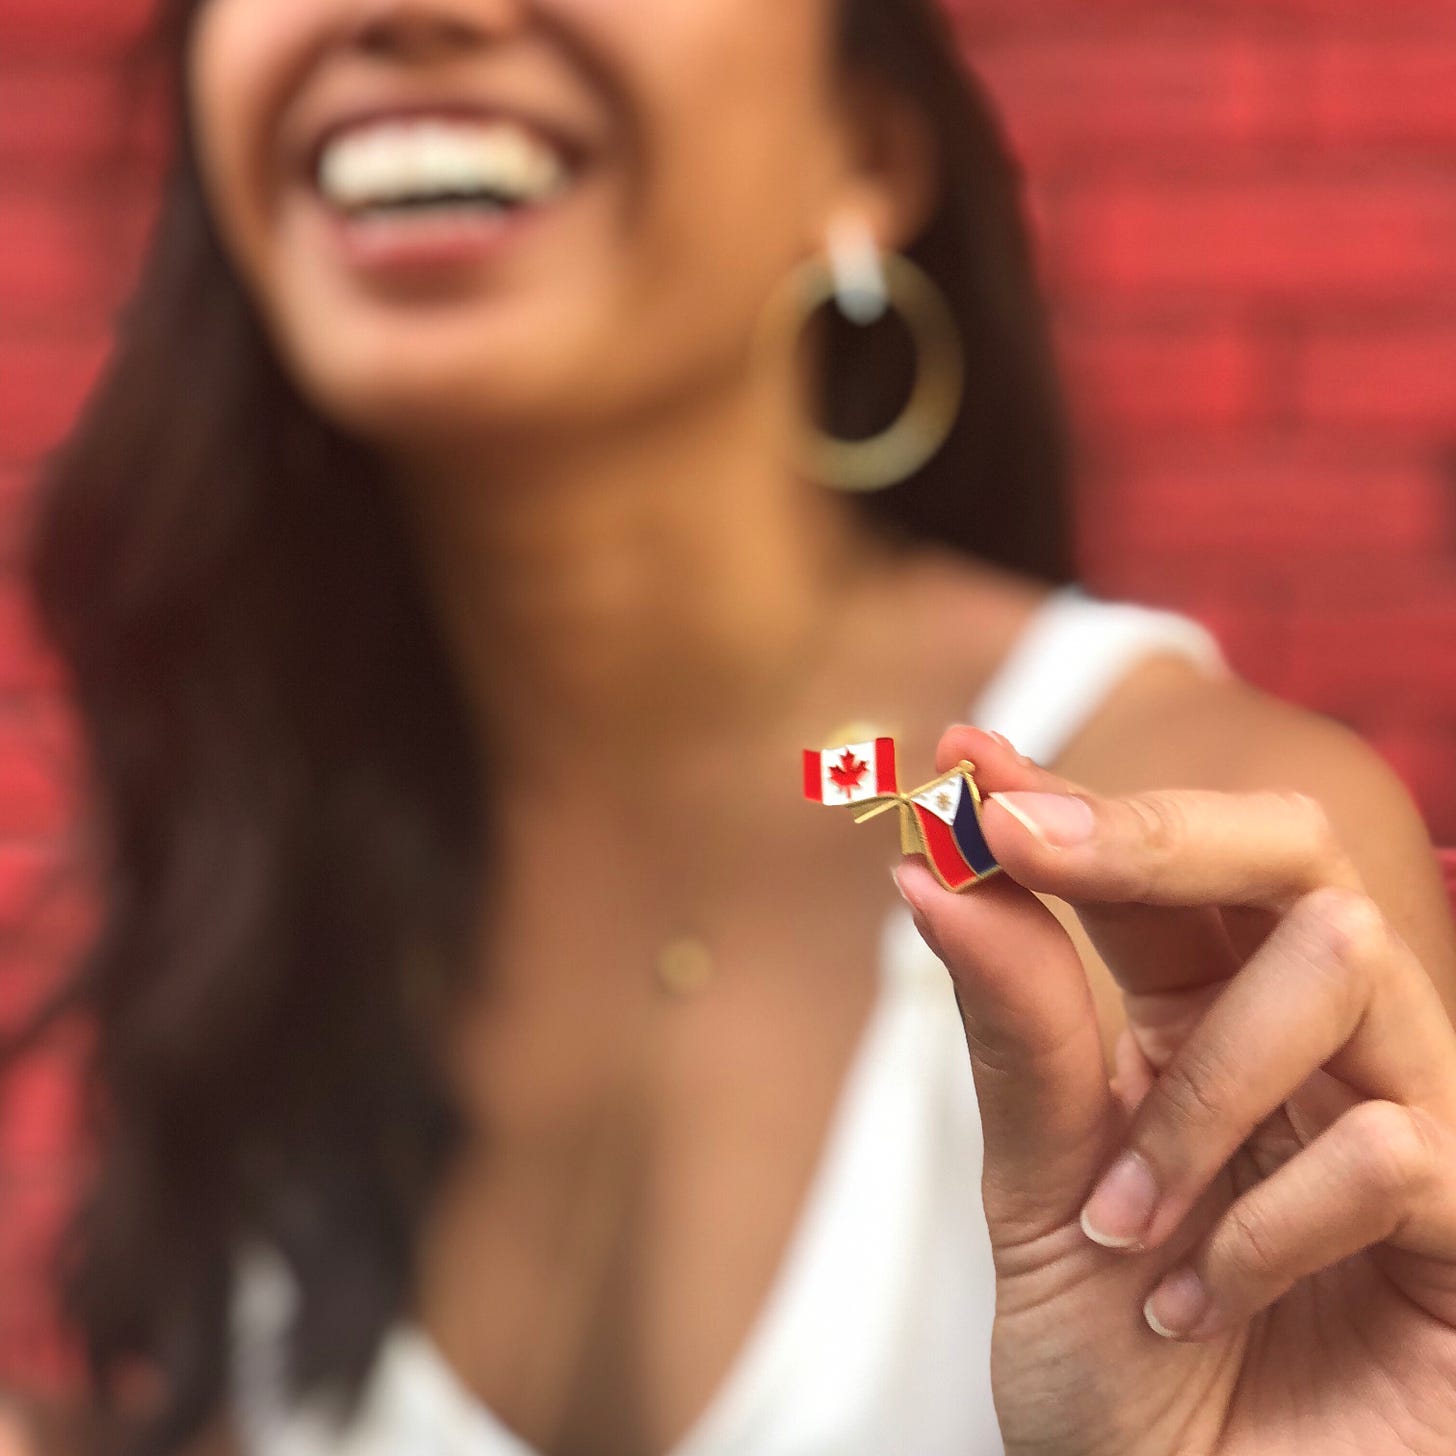 Justine's face blurred while she holds up a small pin with the Philippines and Canadian flag.